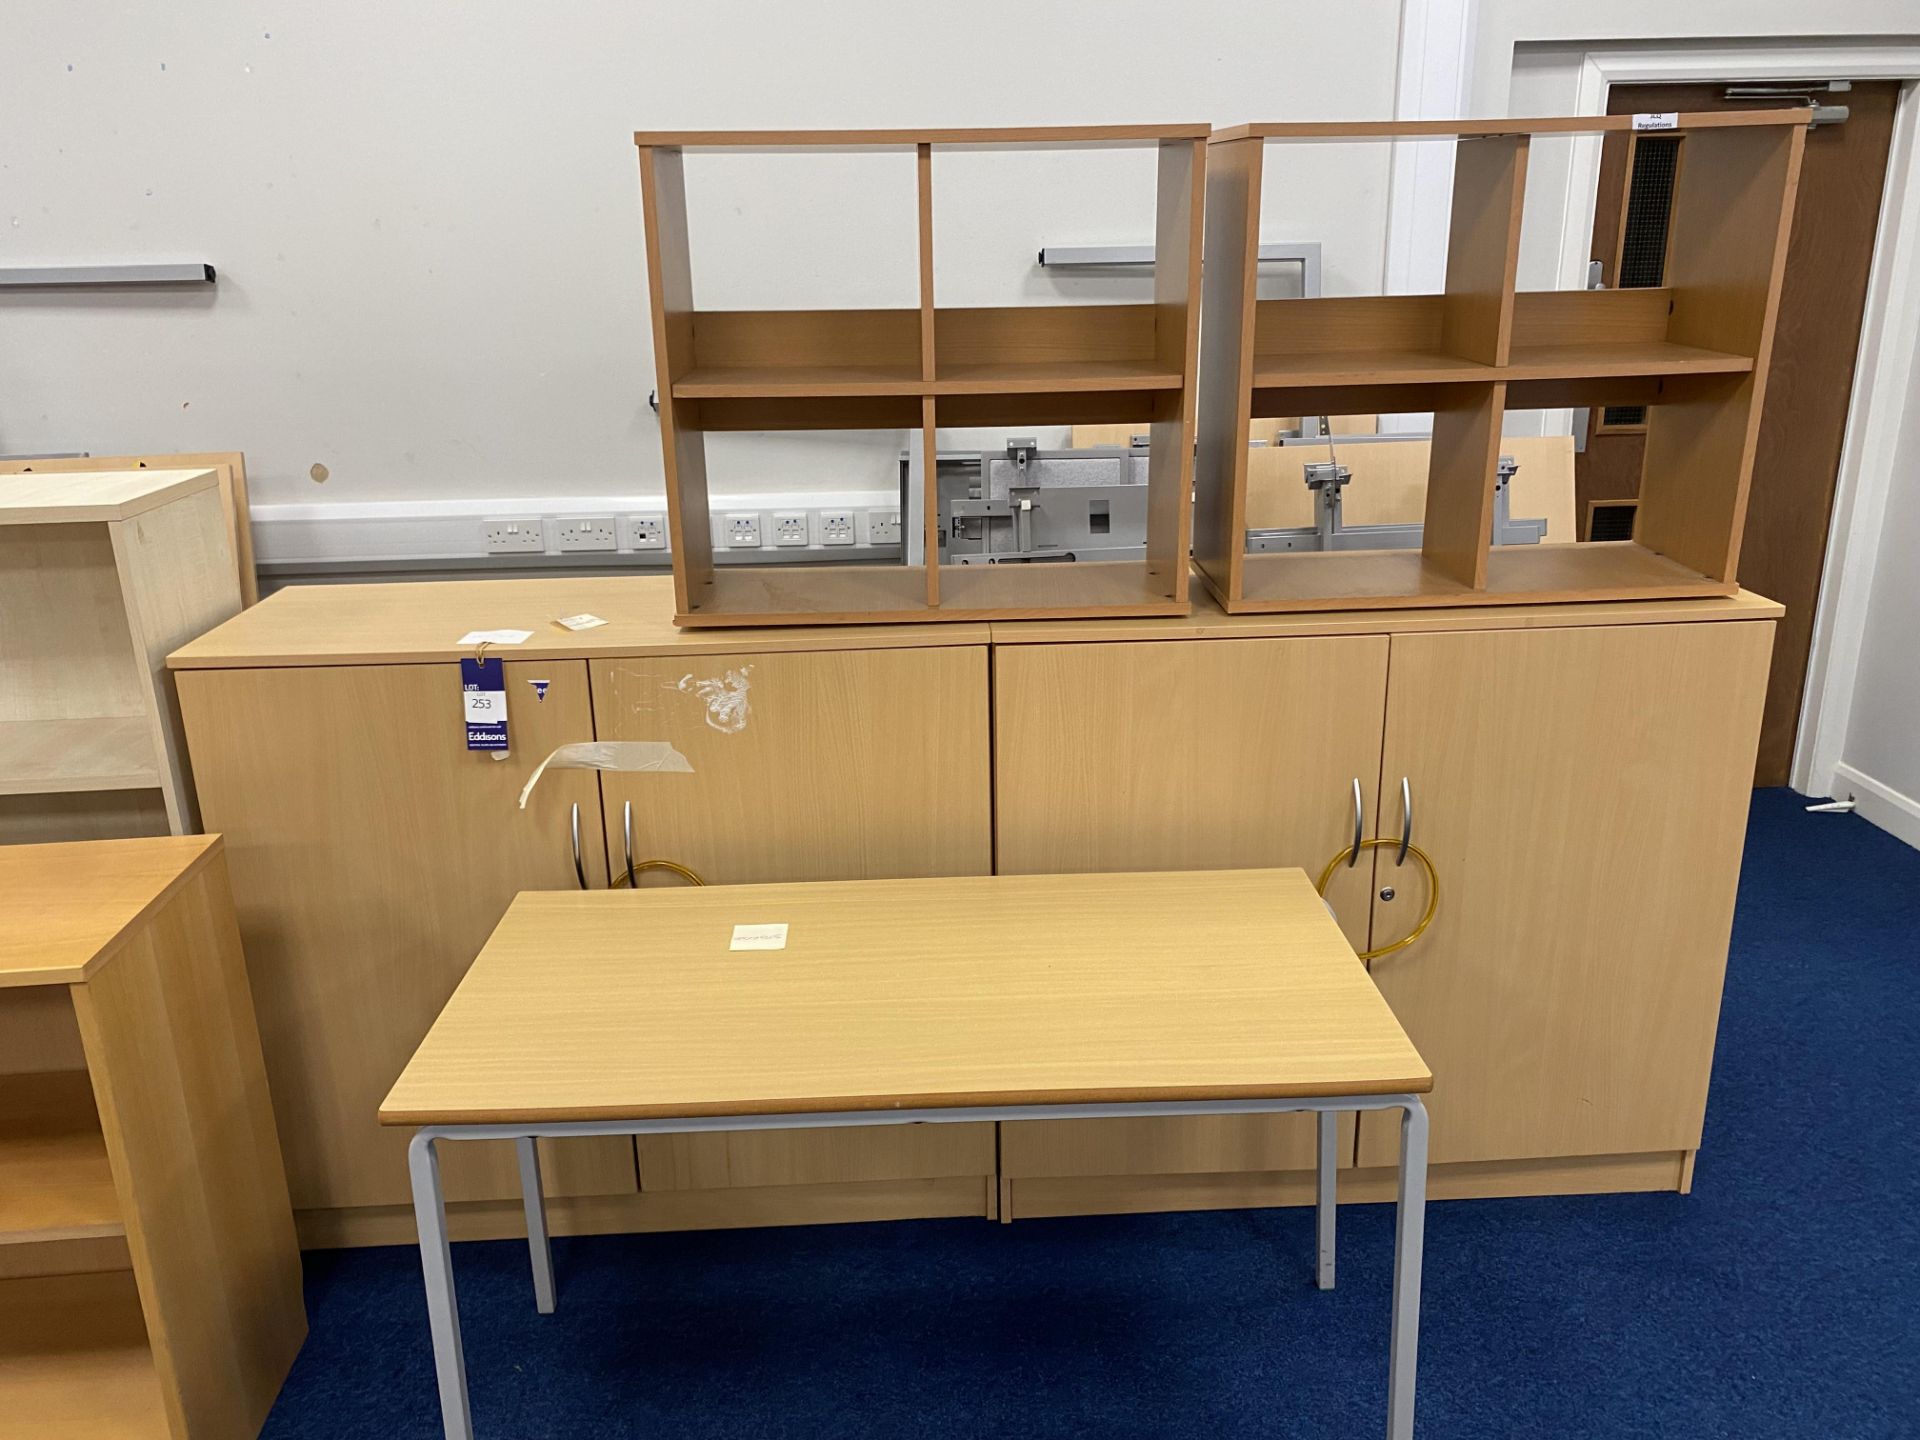 2 x Double Door Cabinets (1070 mm High), 6 x Bookcases and a table. Please note this lot is located